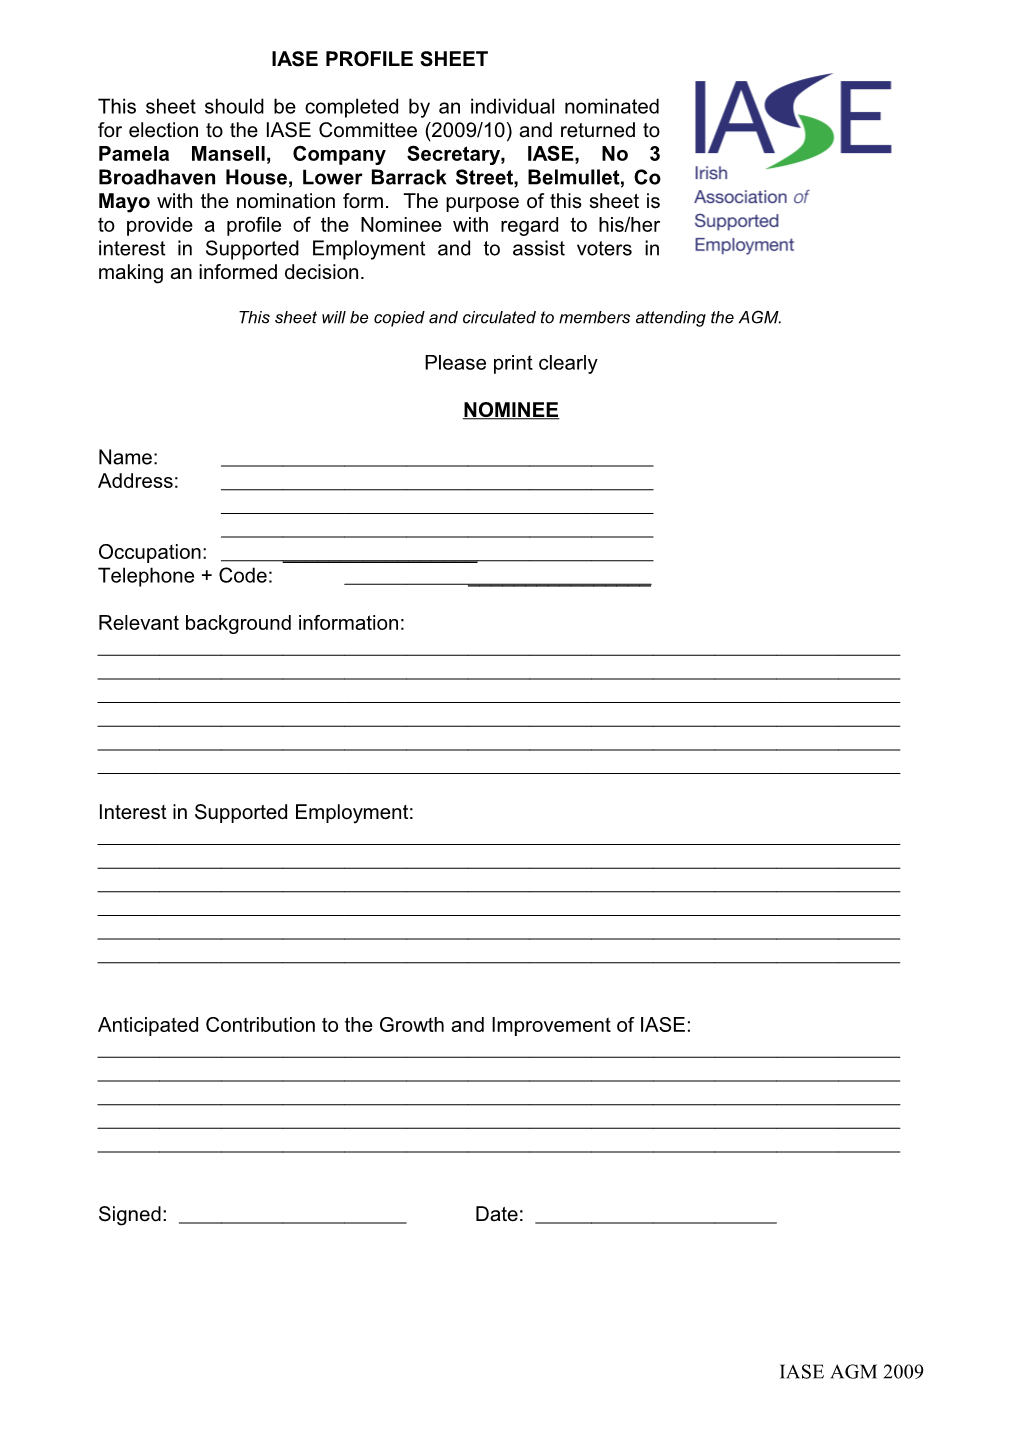 This Sheet Will Be Copied and Circulated to Members Attending the AGM